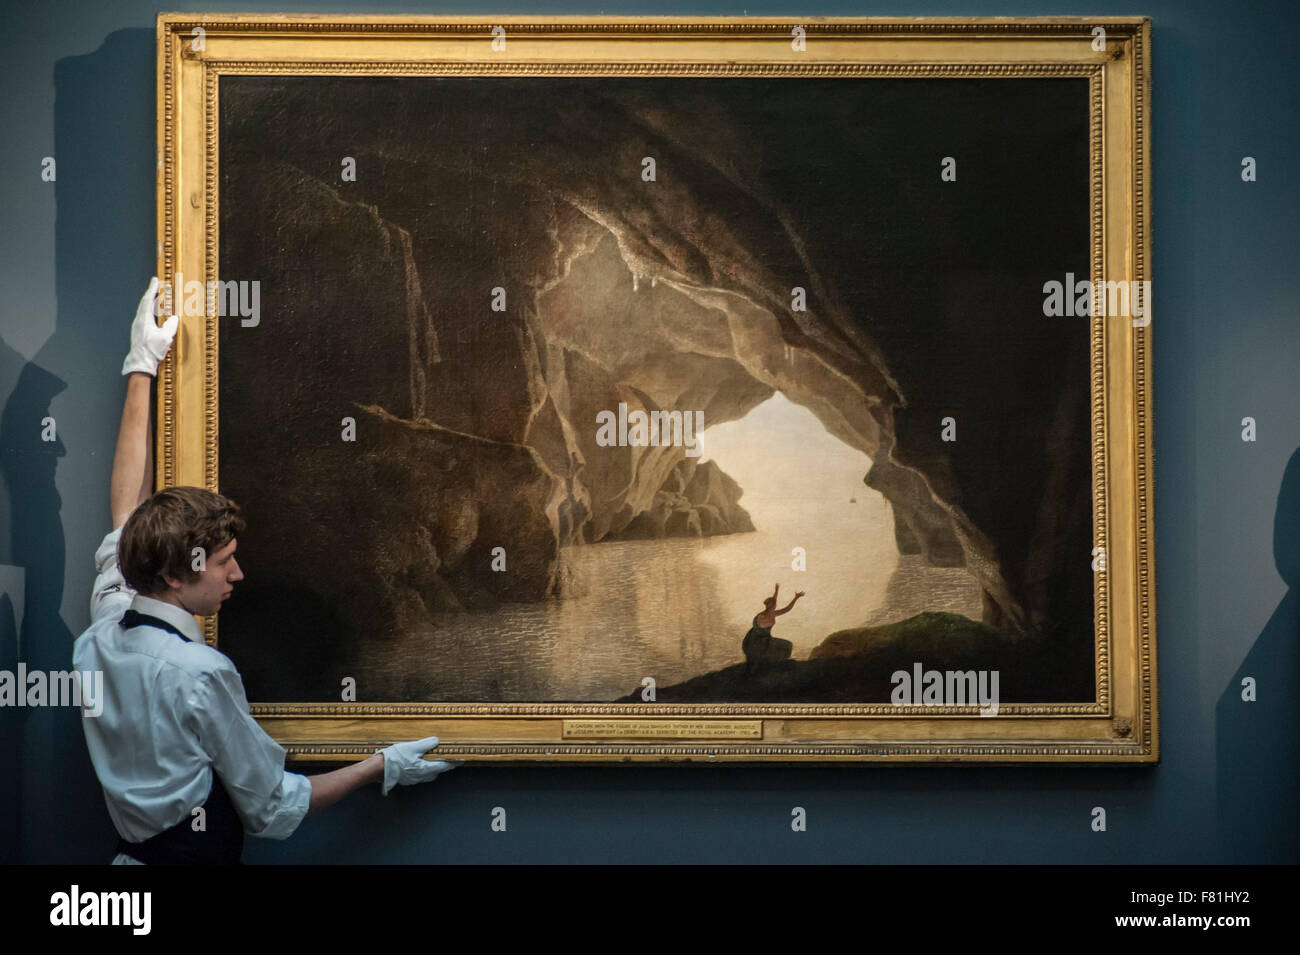 London, UK. 4 December 2015. A technician presents 'A grotto in the Gulf of Salerno, with the figure of Julia, banished from Rome' by Joseph Wright of Derby (est. £100,000-150,000), ahead of Sotheby's London evening sale of Old Master and British paintings on 9th December 2015.  Credit:  Stephen Chung/Alamy Live News Stock Photo